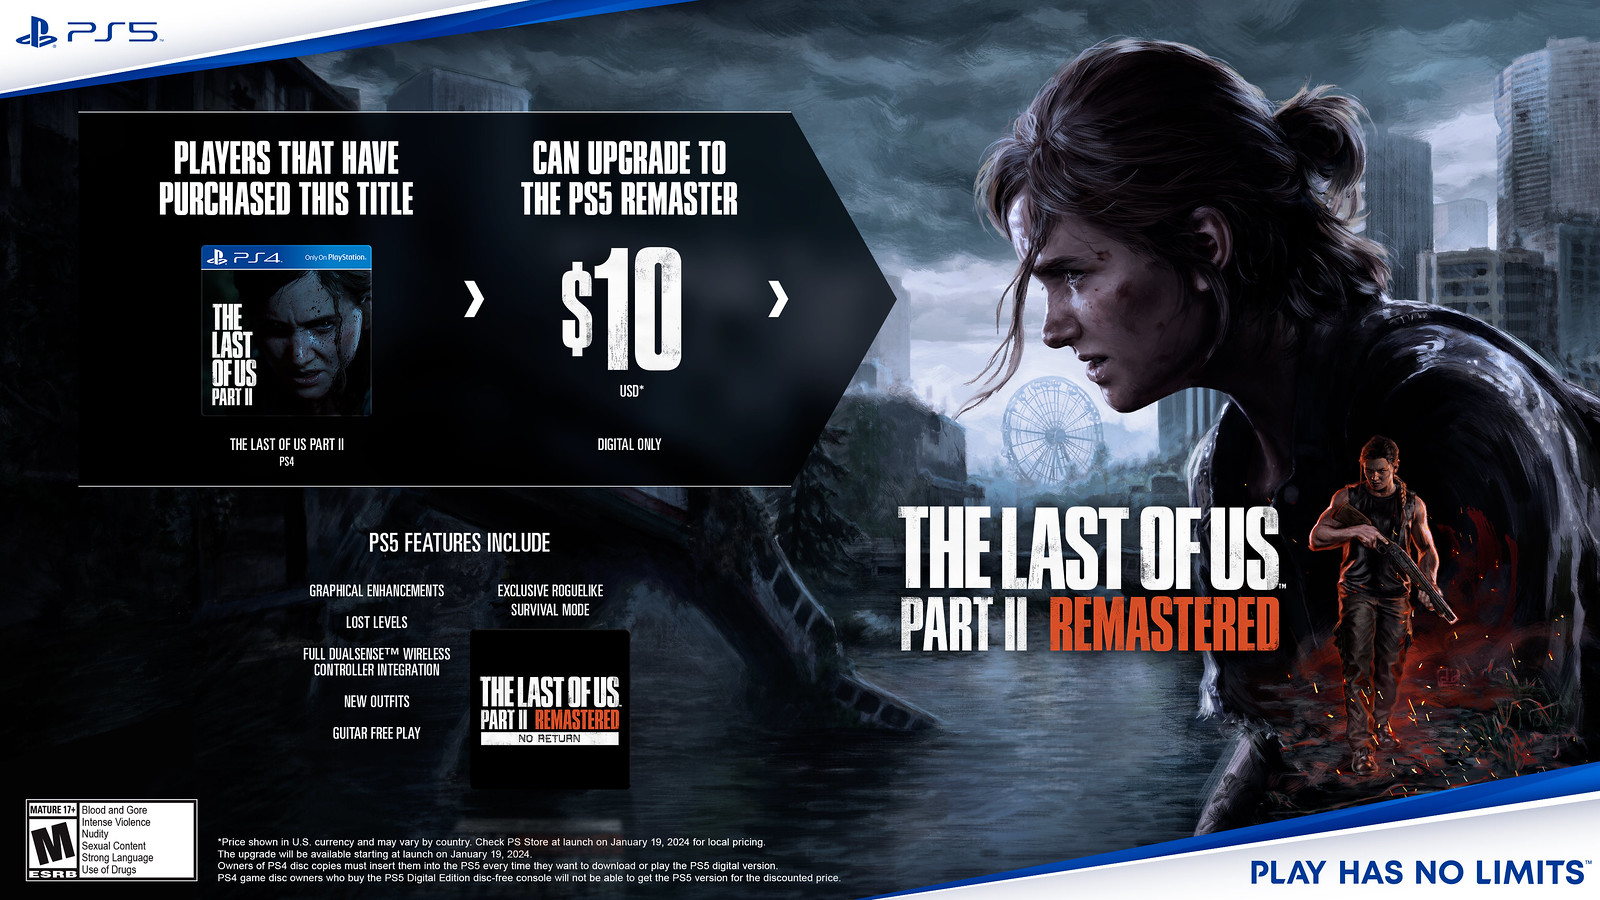 No Return: All challenges in The Last of Us 2 Remastered new mode